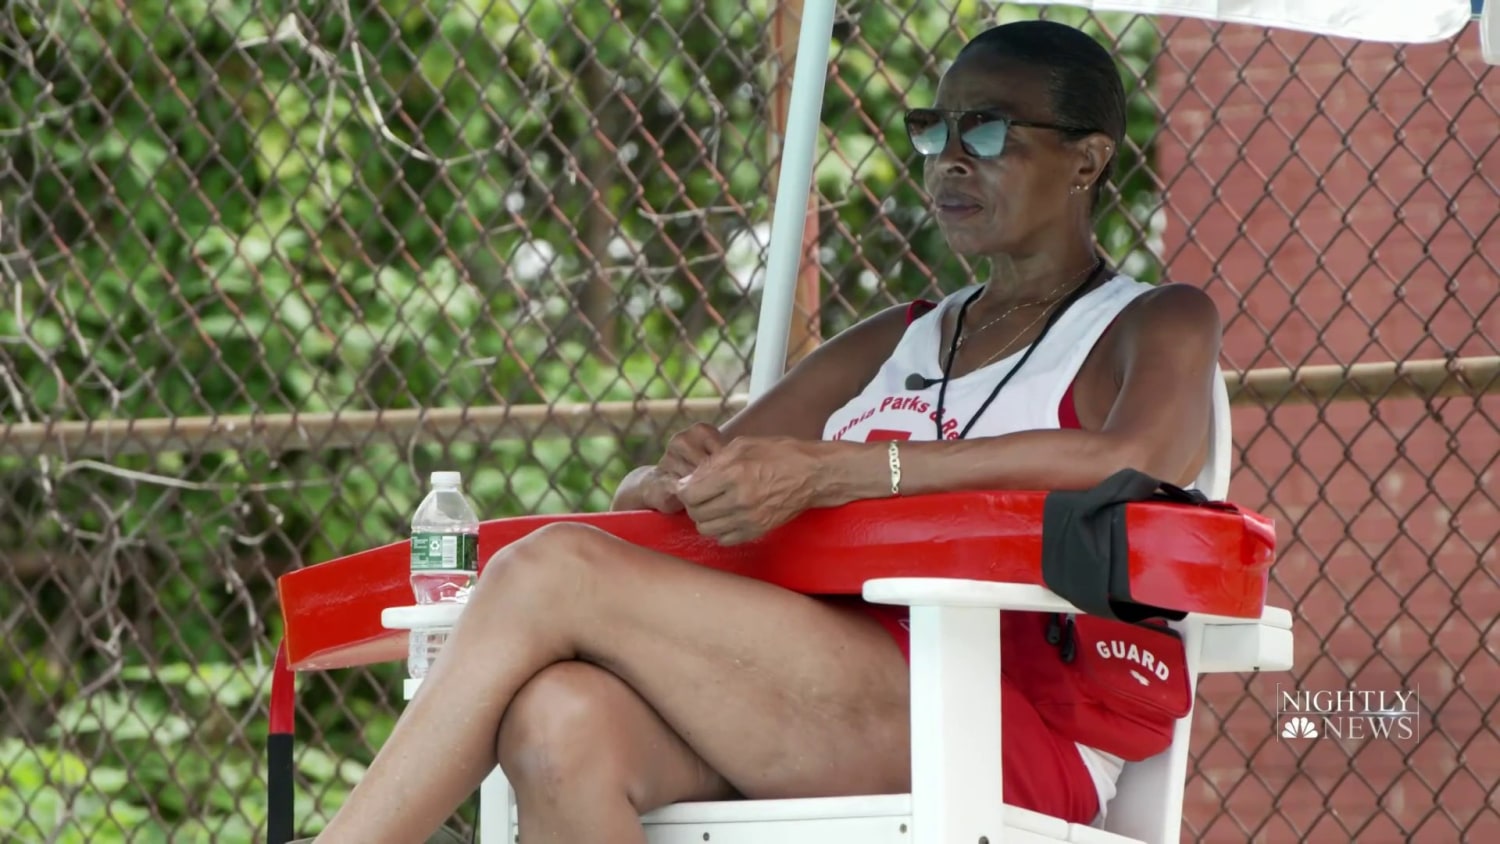 70-year-old Grandmother In Philadelphia Becomes A Lifeguard To